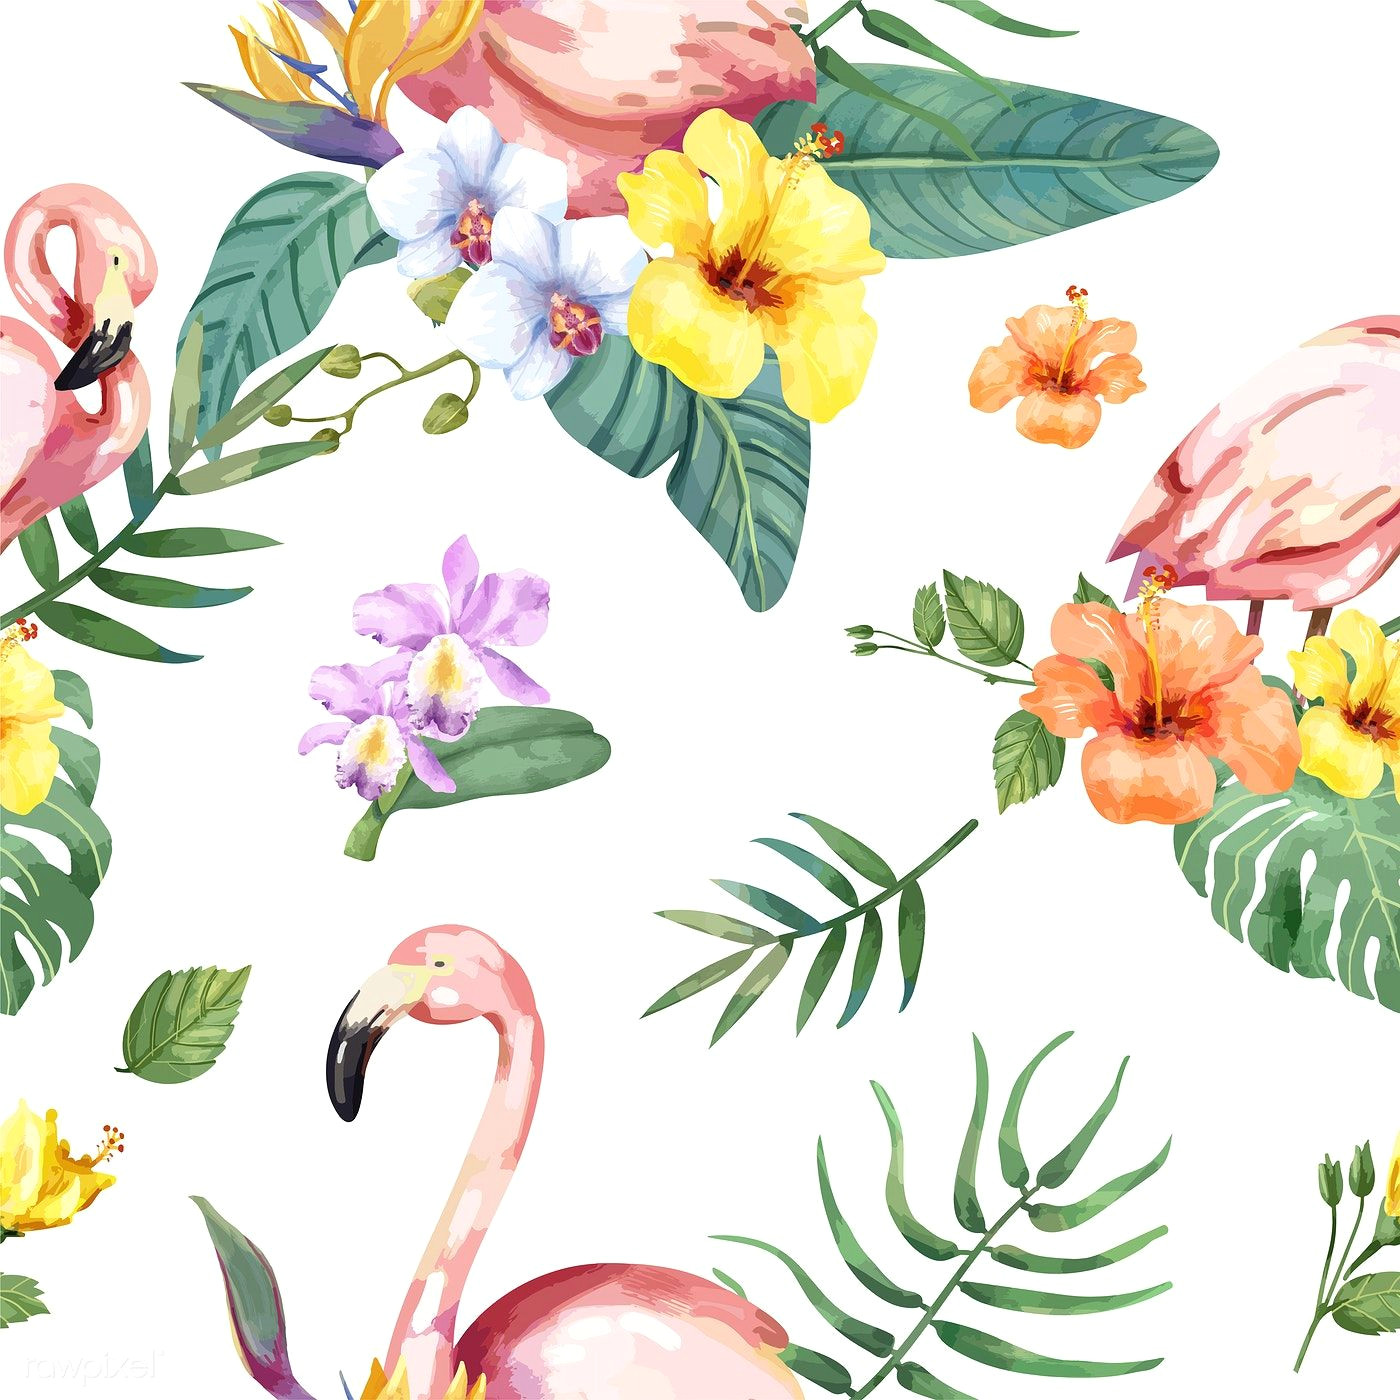 Drawing Exotic Flowers Hand Drawn Flamingo Bird with Tropical Flowers Premium Image by